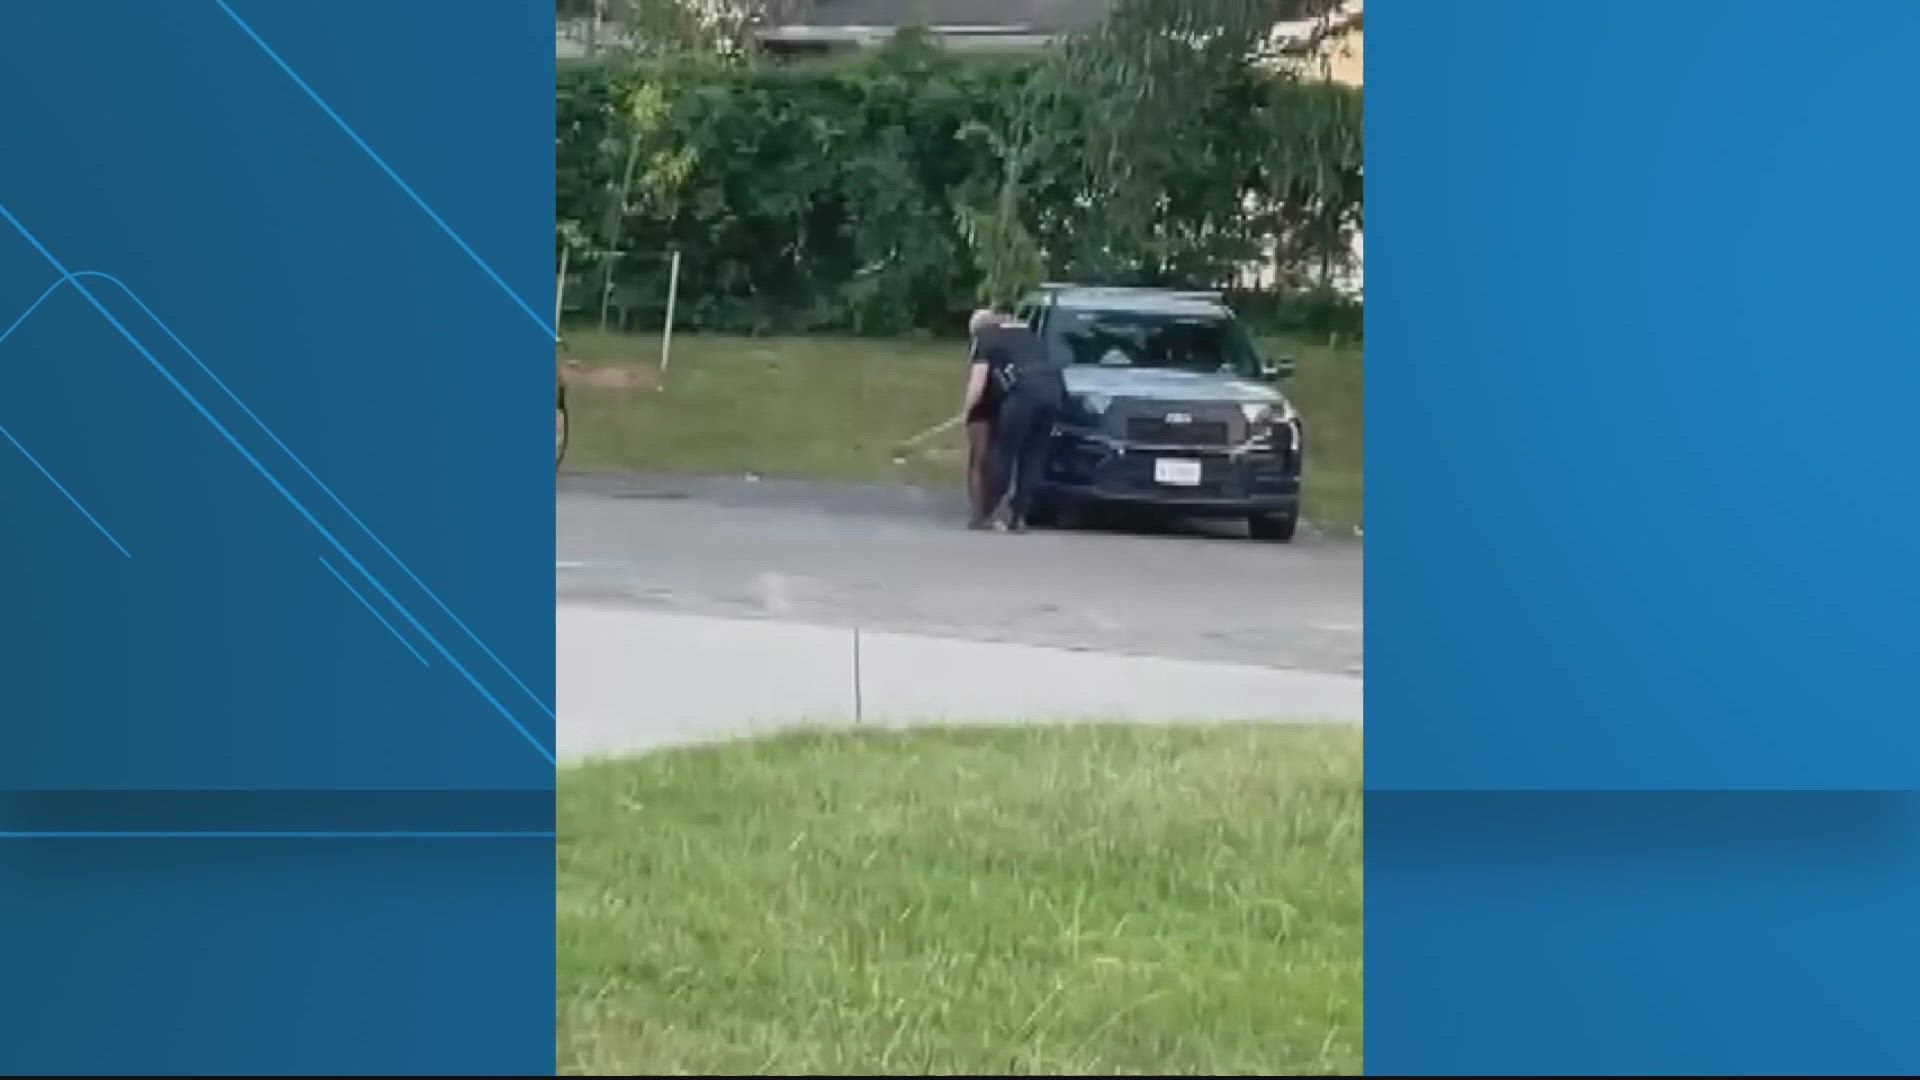 Prince George's Police says their internal affairs unit continues their investigation into the officer's conduct and what happened in the back of that police SUV.